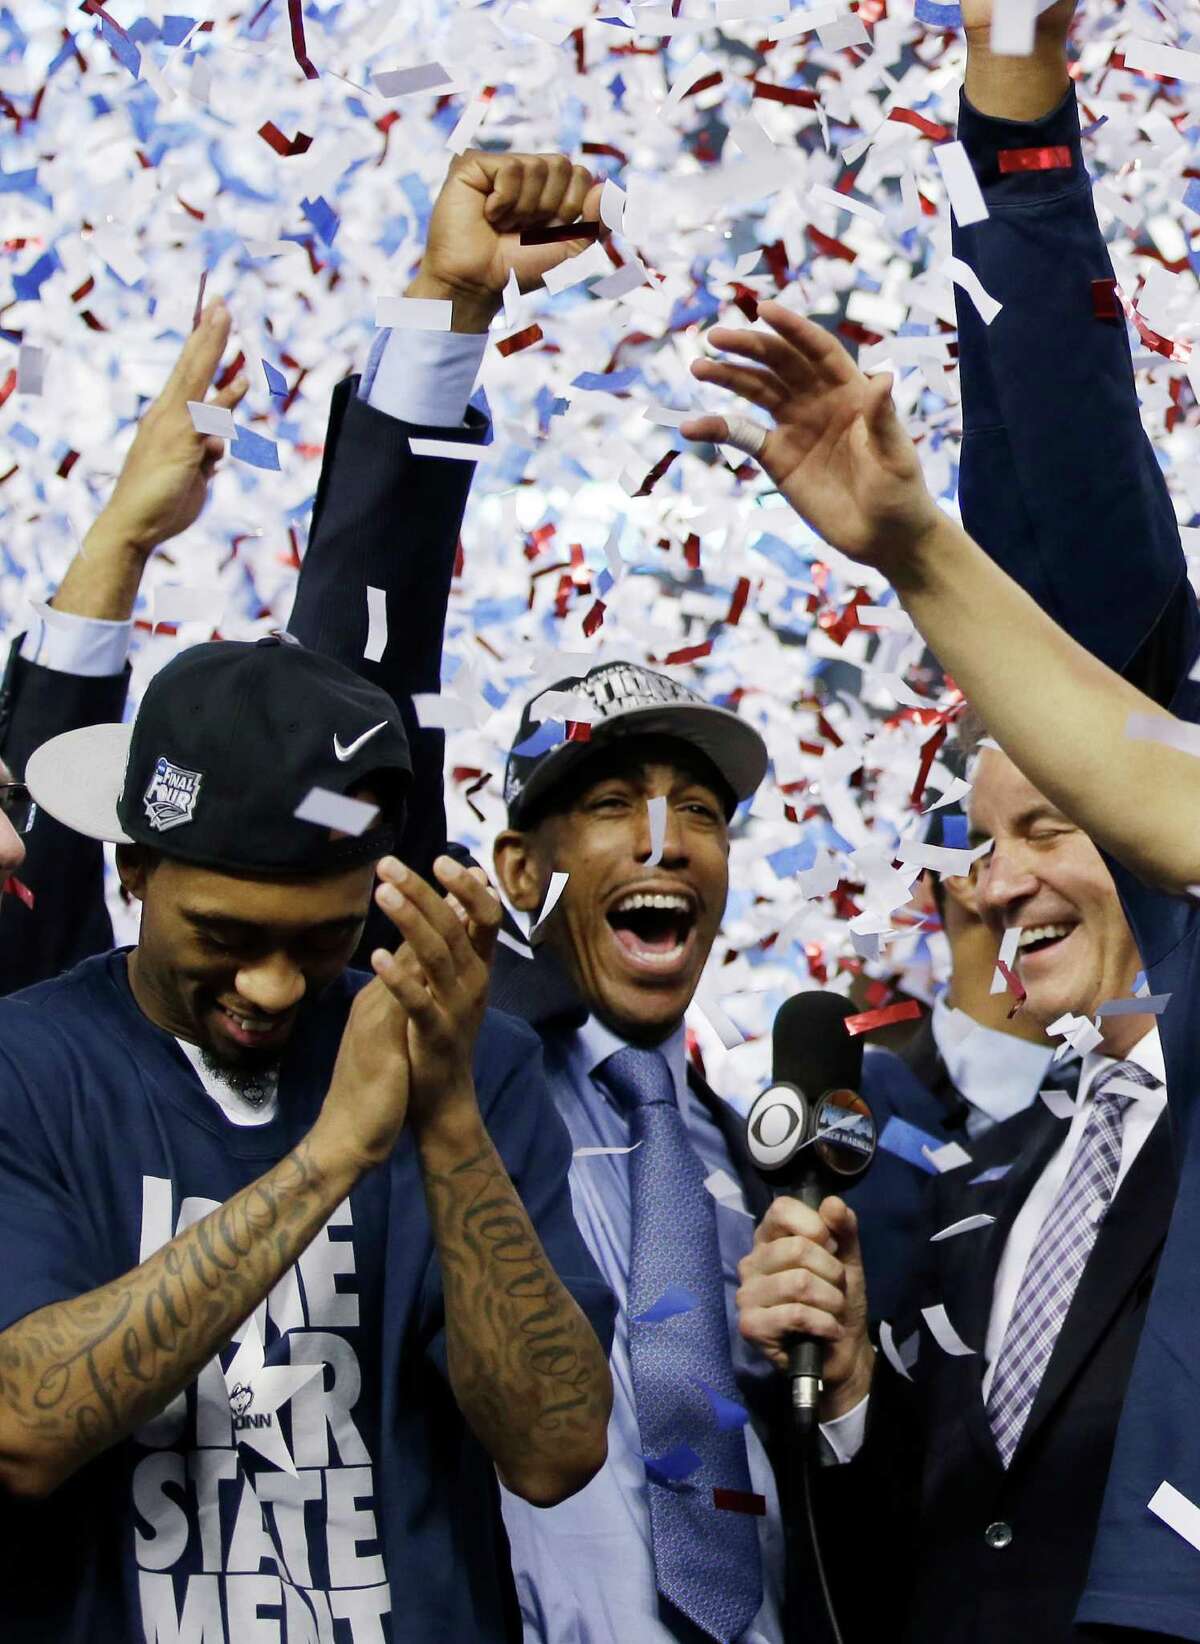 Connecticut player Ryan Boatright and head coach Kevin Ollie, center, celebrates with his team after their 60-54 victory over Kentucky in the NCAA Final Four tournament college basketball championship game Monday, April 7, 2014, in Arlington, Texas.